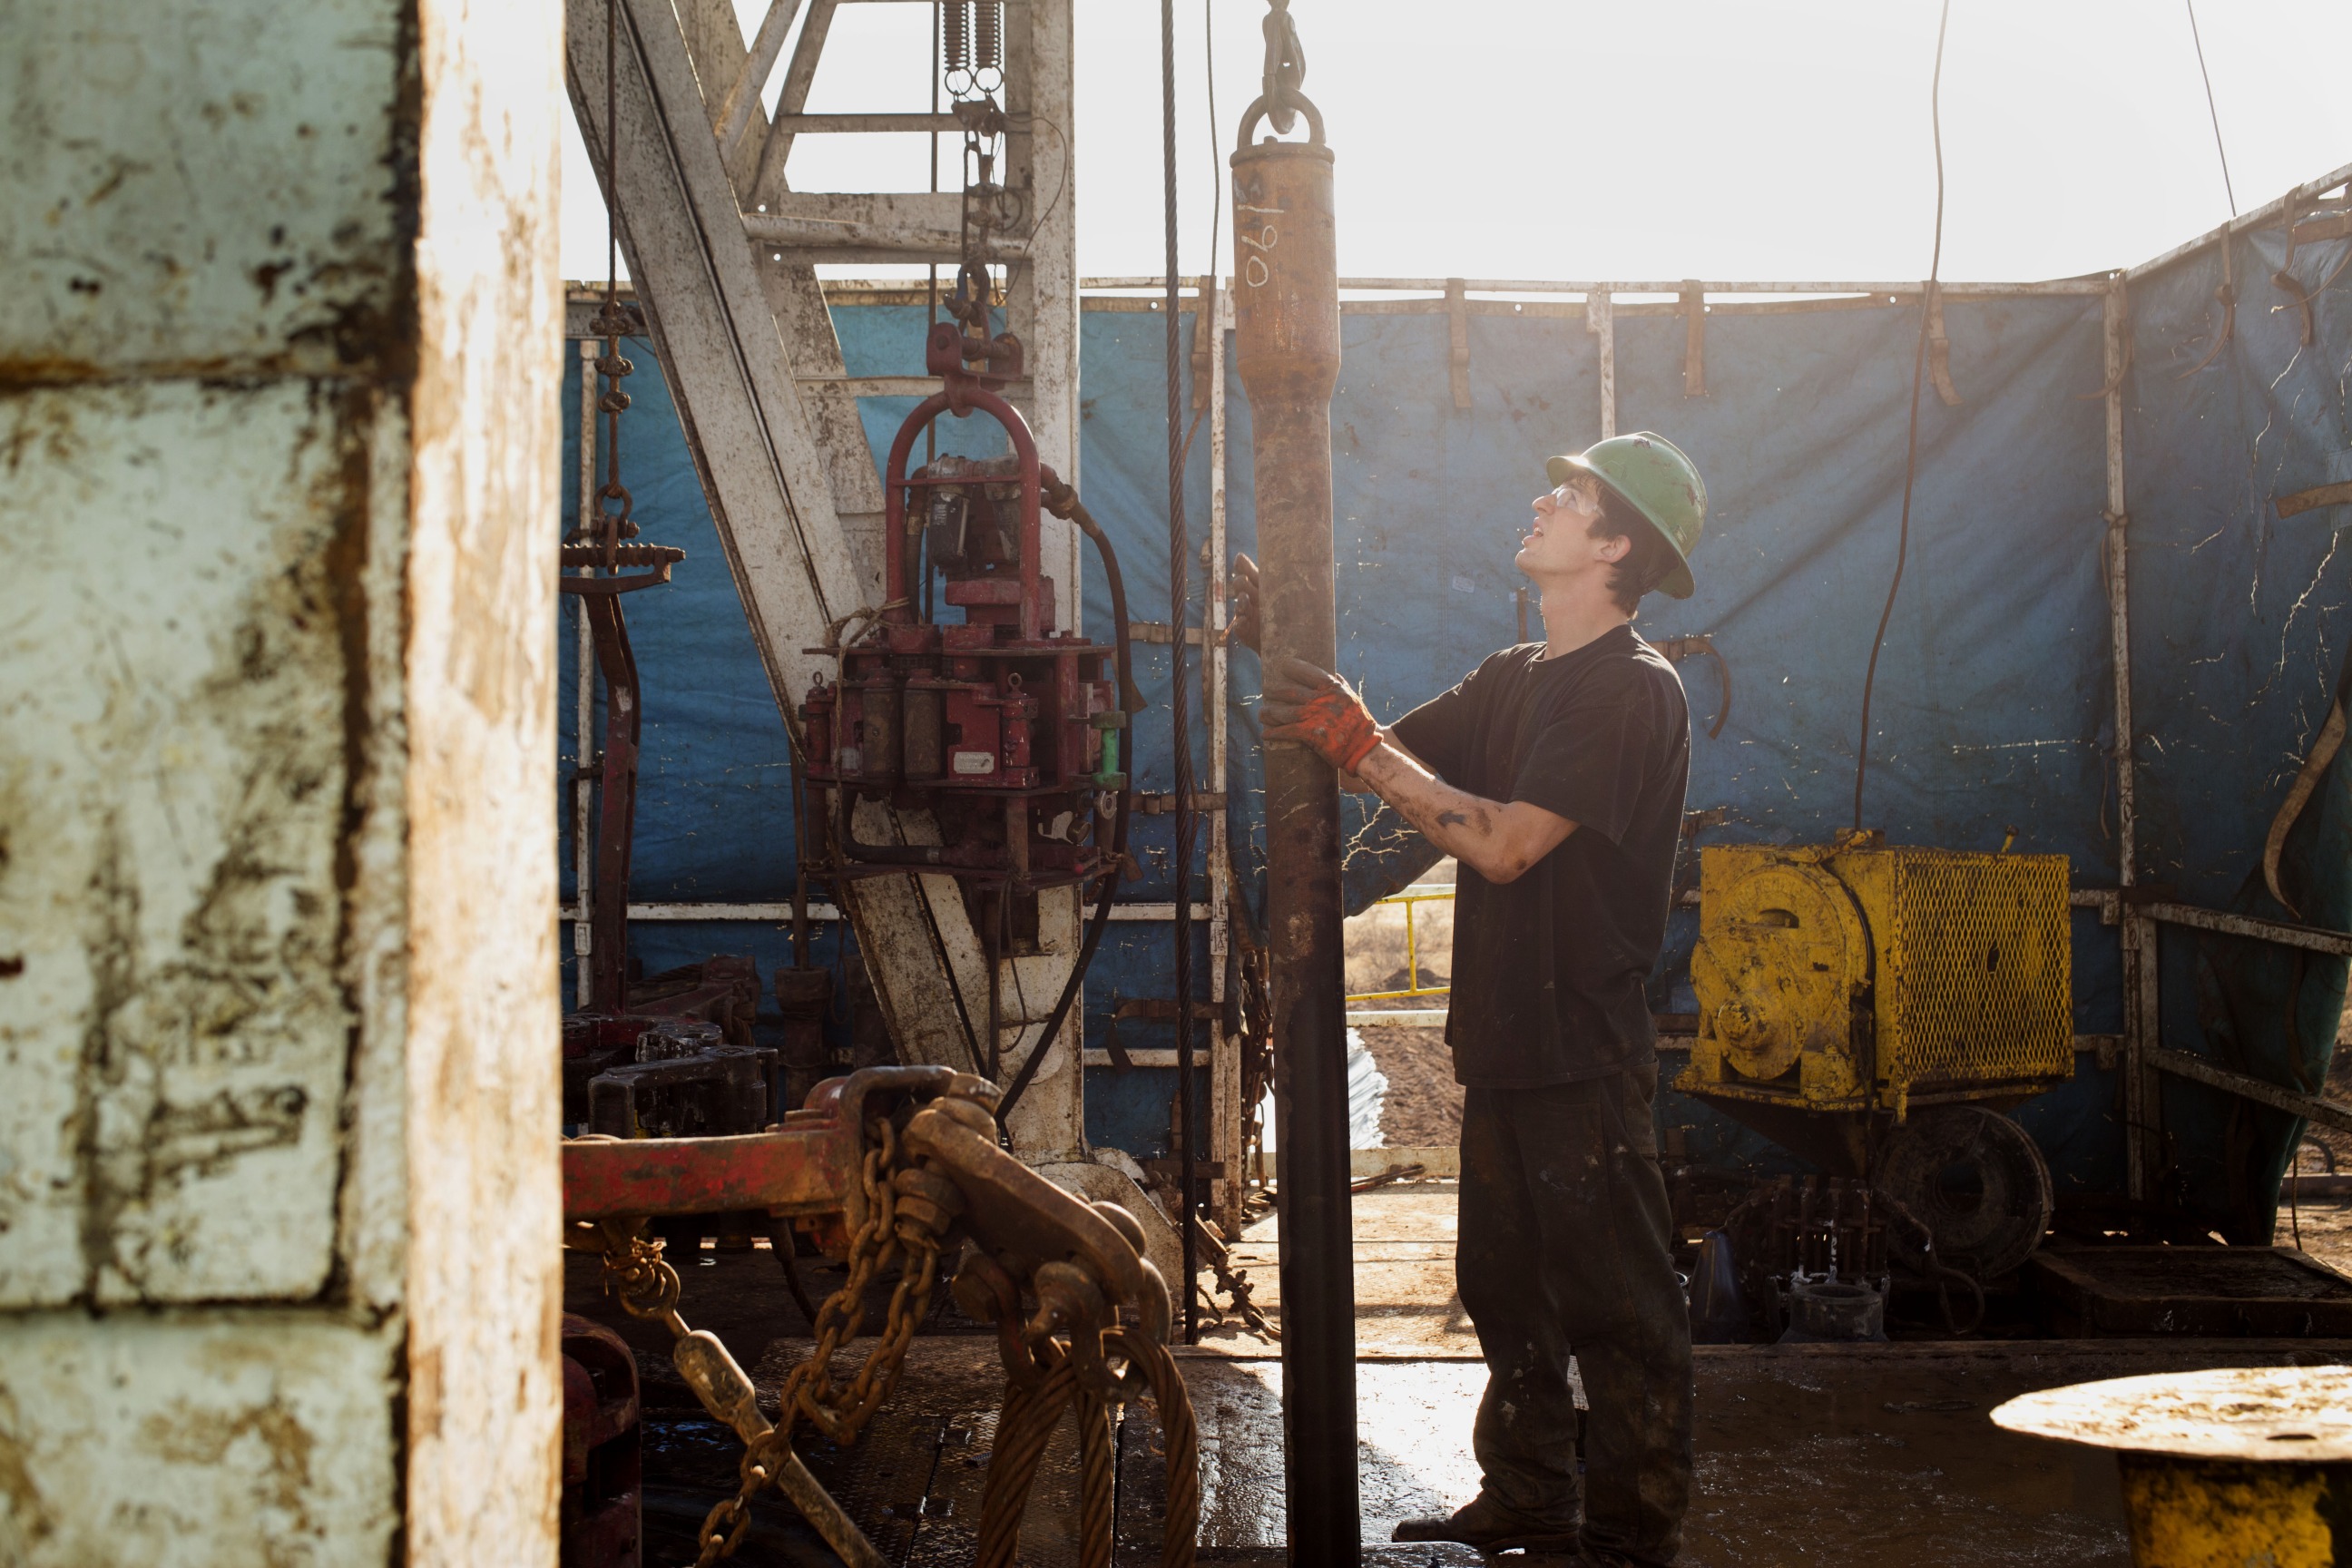 A worker checks the drilling rig before attaching it to the turntable on Endeavor Energy Resources LP's Big Dog Drilling Rig 22 in the Permian basin outside of Midland, Texas, U.S., on Friday, Dec. 12, 2014.  Photographer: Brittany Sowacke/Bloomberg